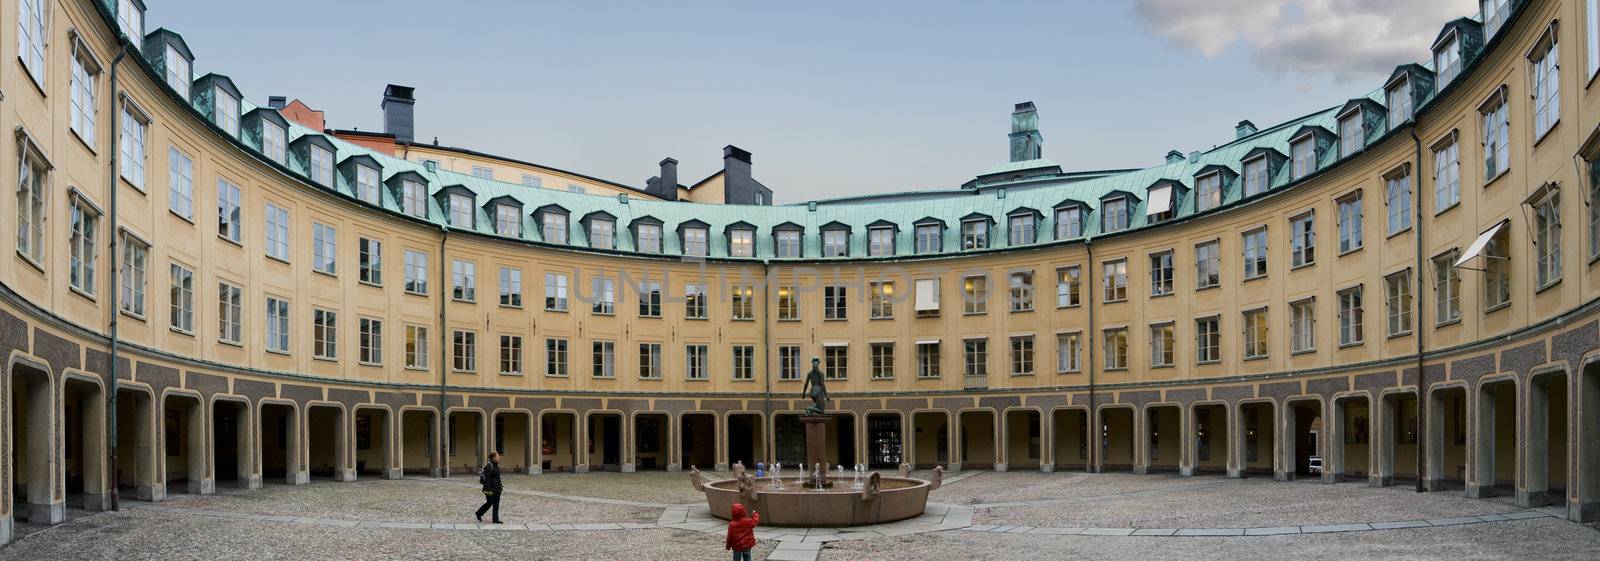 Courtyard in Stockholm by ints